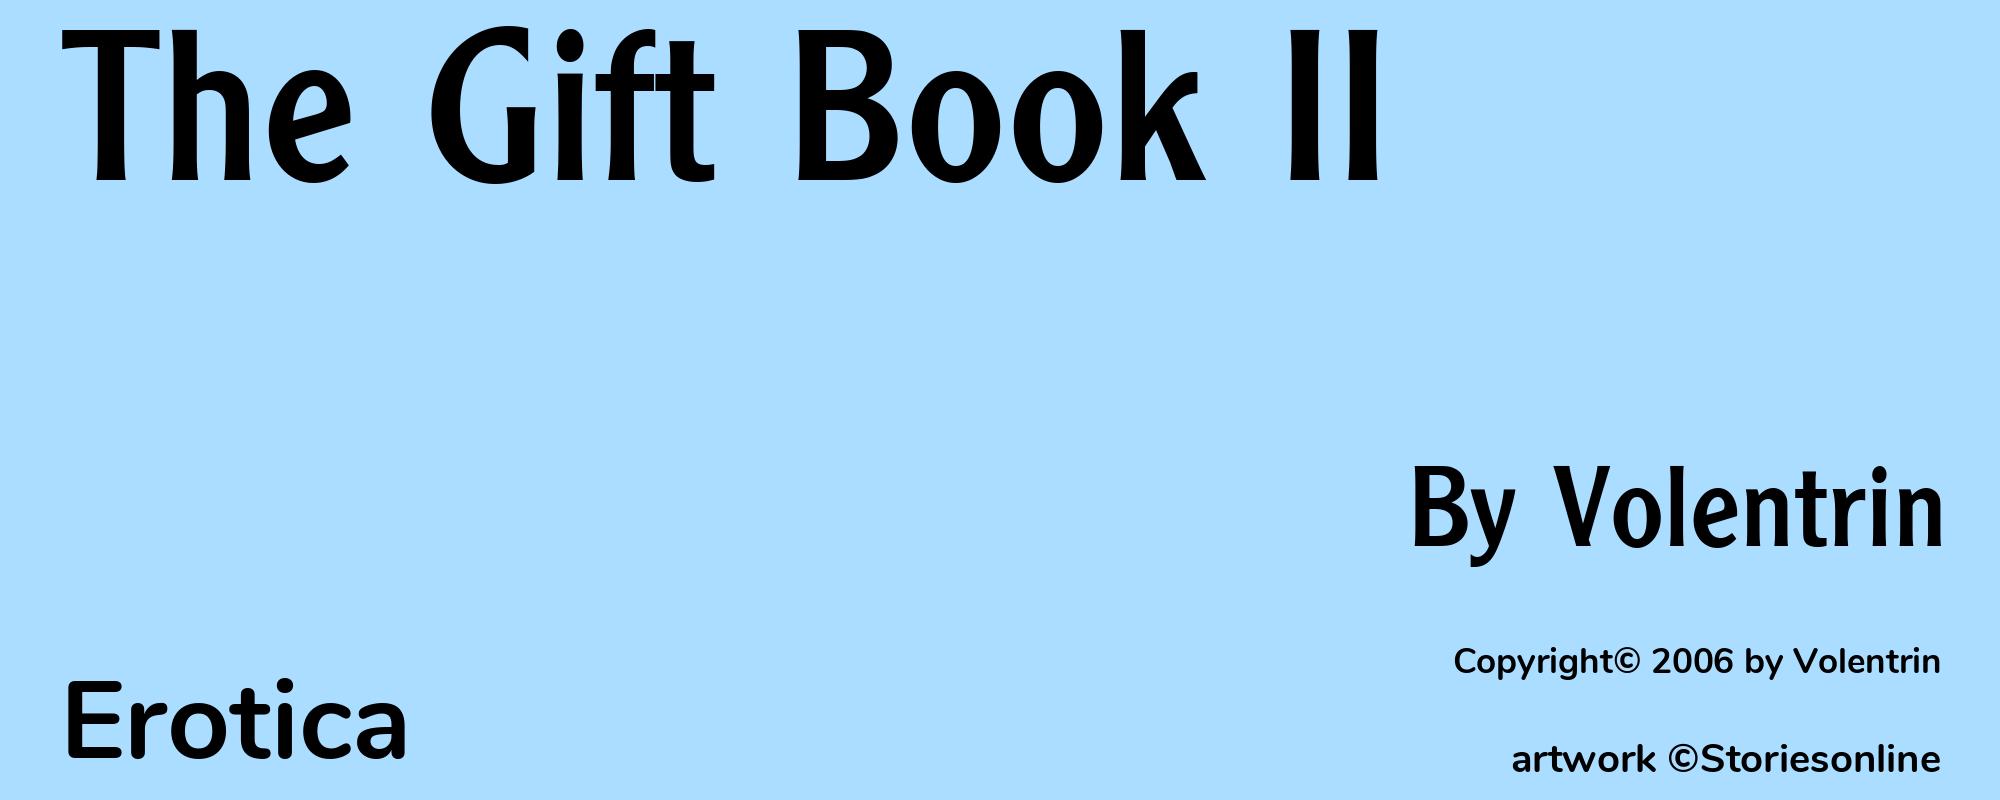 The Gift Book II - Cover